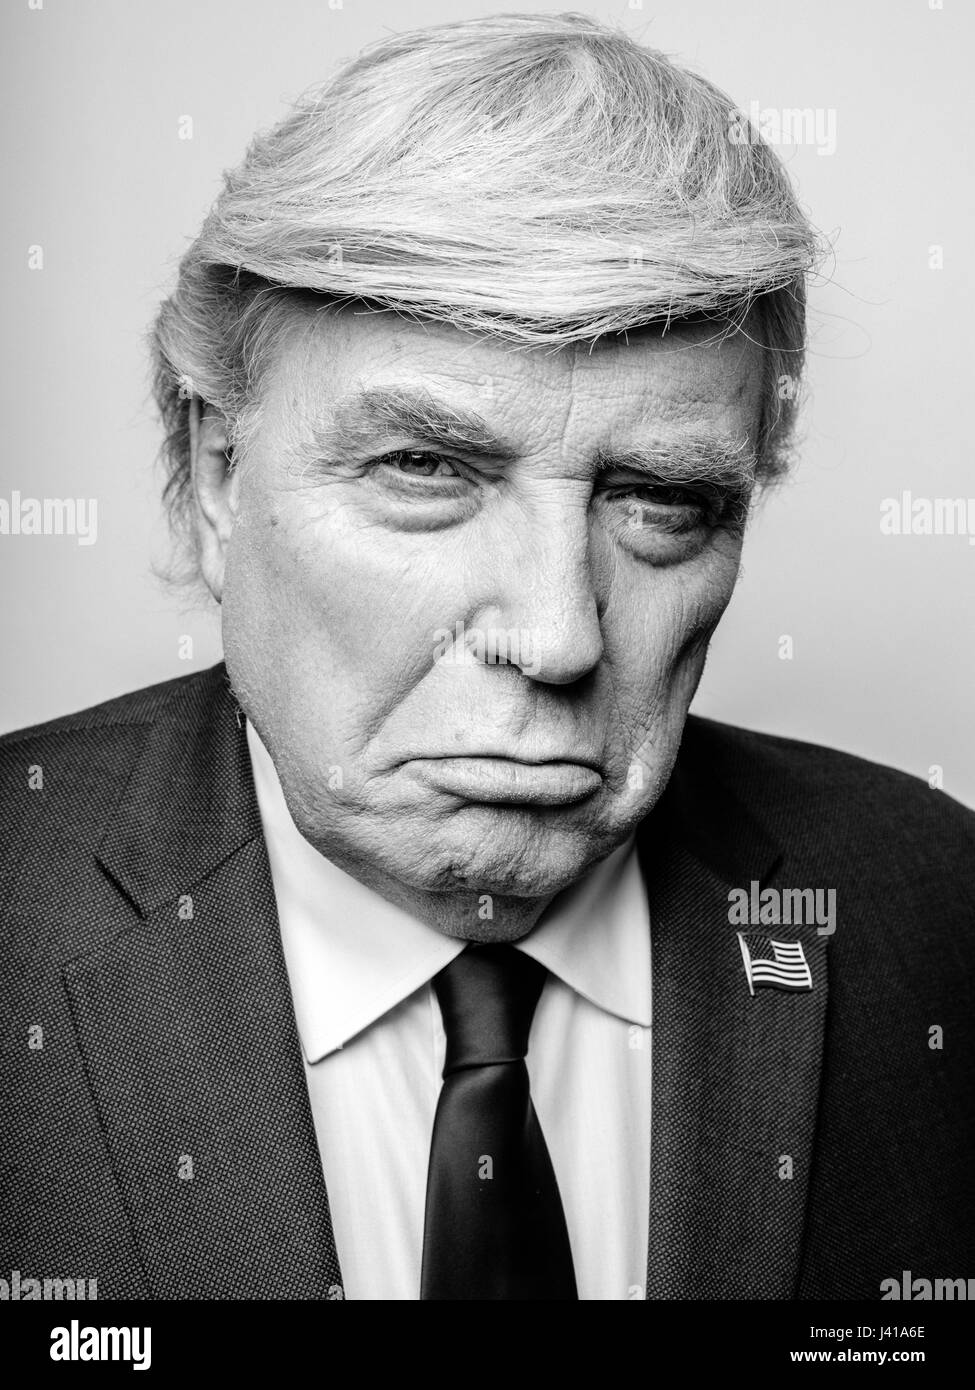 President Donald Trump lookalike Dennis Alan from Chicago, USA during his visit to Hong Kong.  He is the premier Donald Trump lookalike in the world. Stock Photo